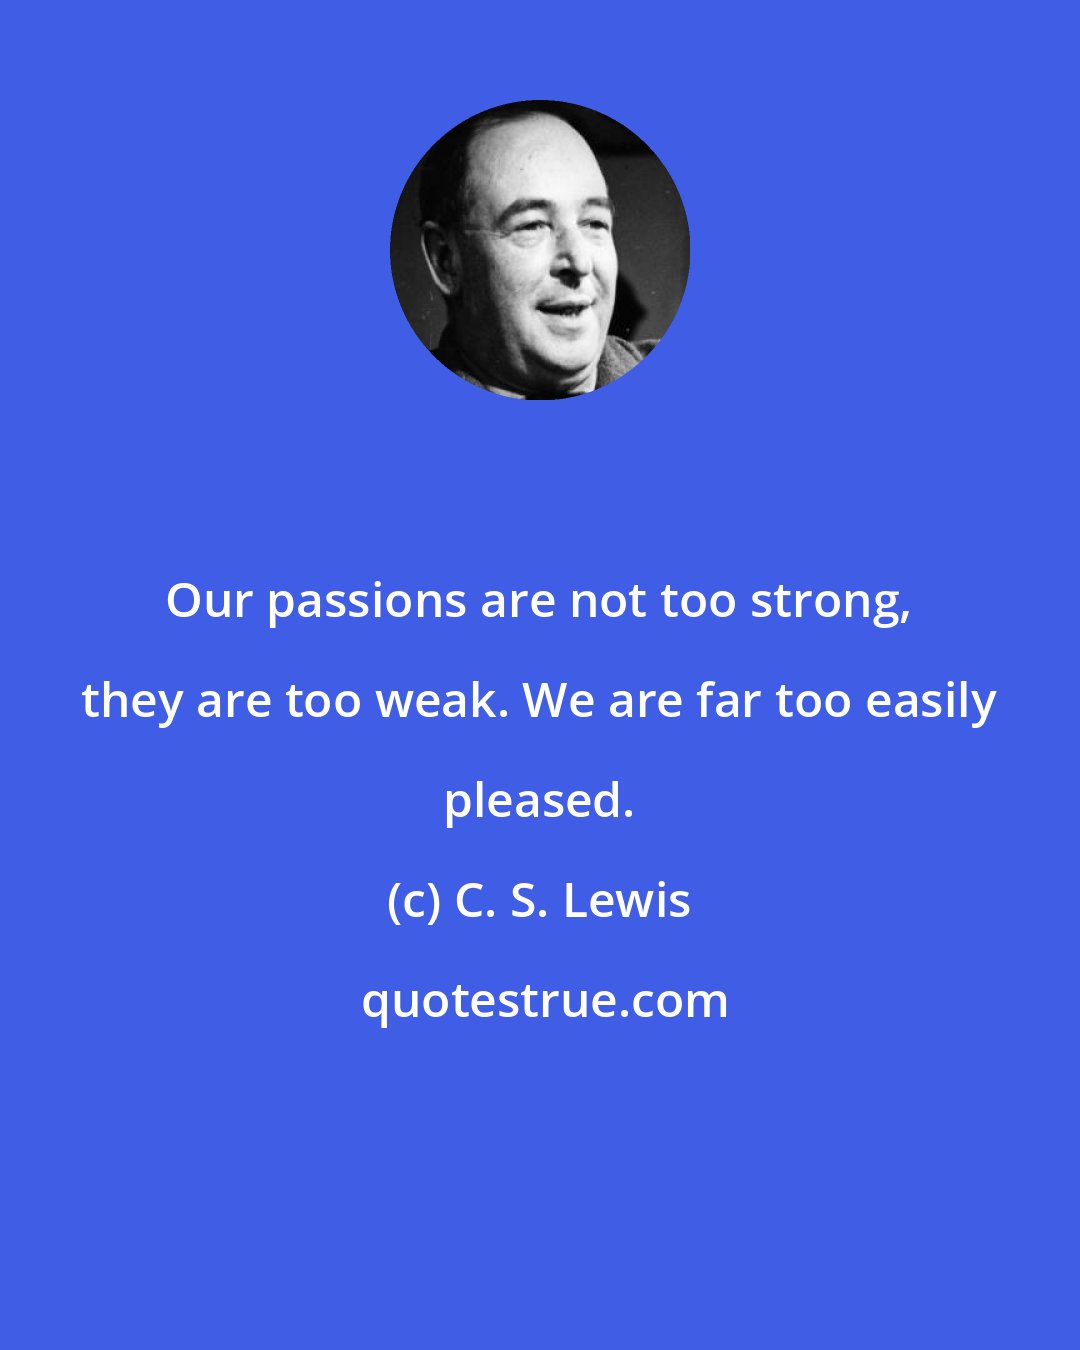 C. S. Lewis: Our passions are not too strong, they are too weak. We are far too easily pleased.